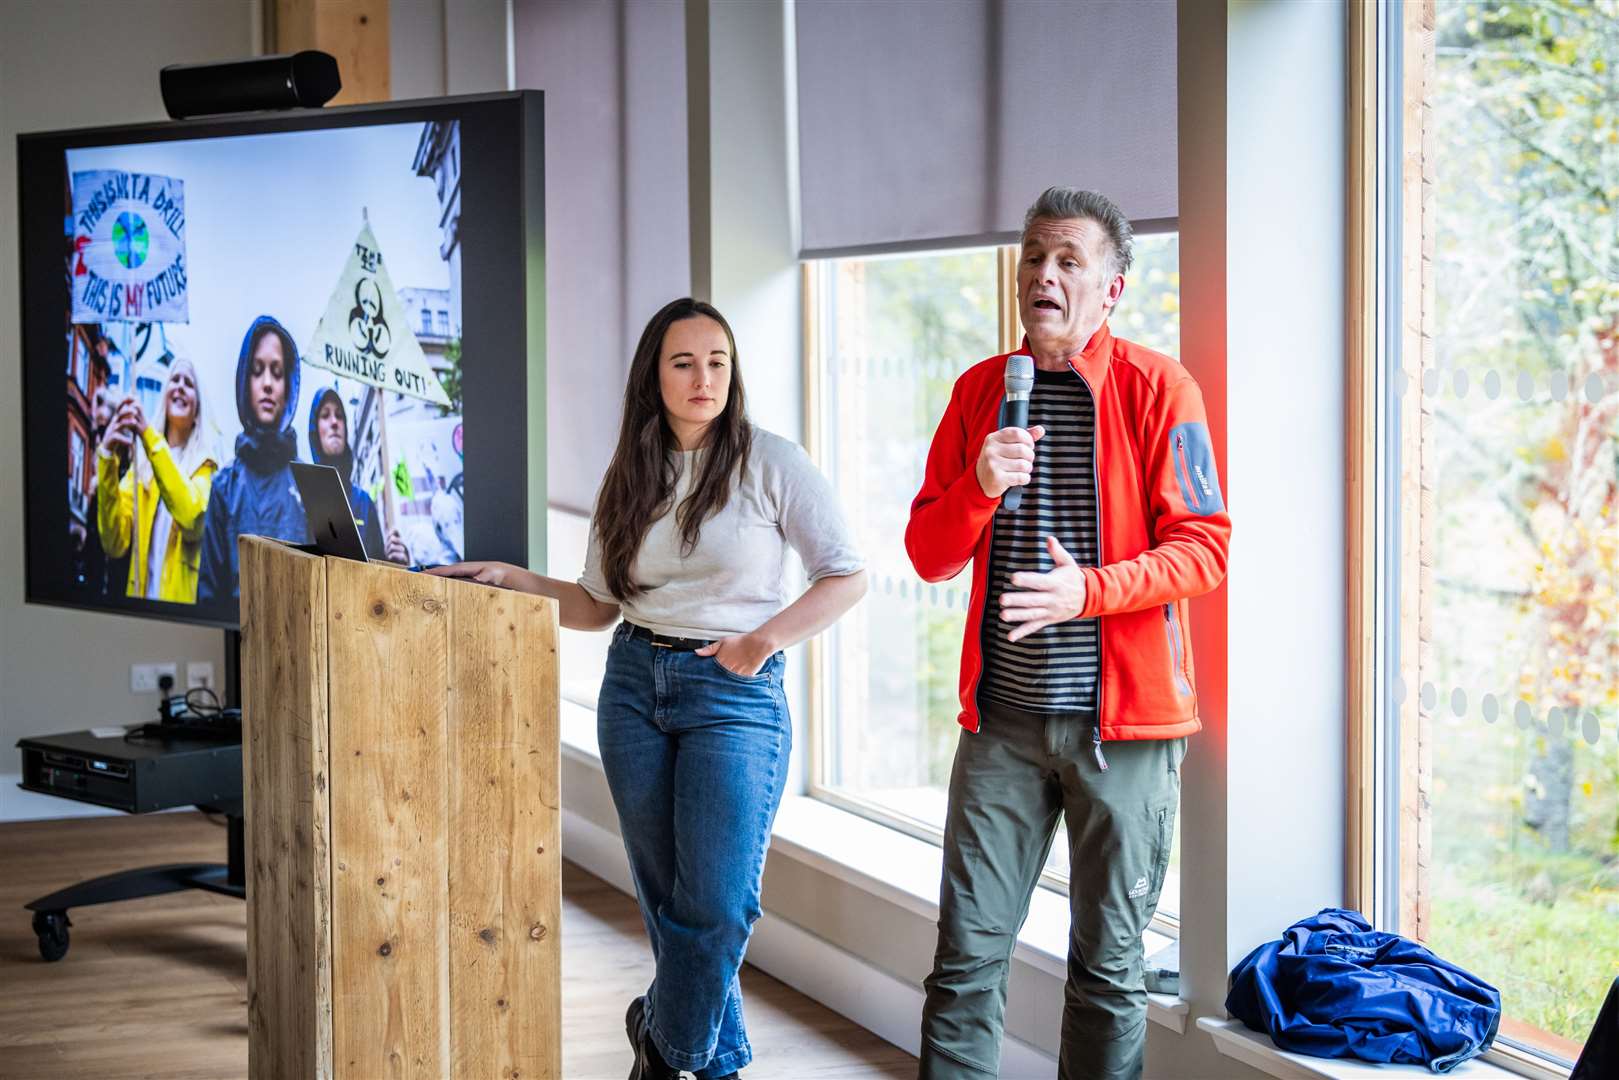 Chris Packham speaks to the crowd at the Dundreggan Rewilding Centre on Saturday alongside Megan McCubbin. Picture: Paul Campbell/Trees For Life